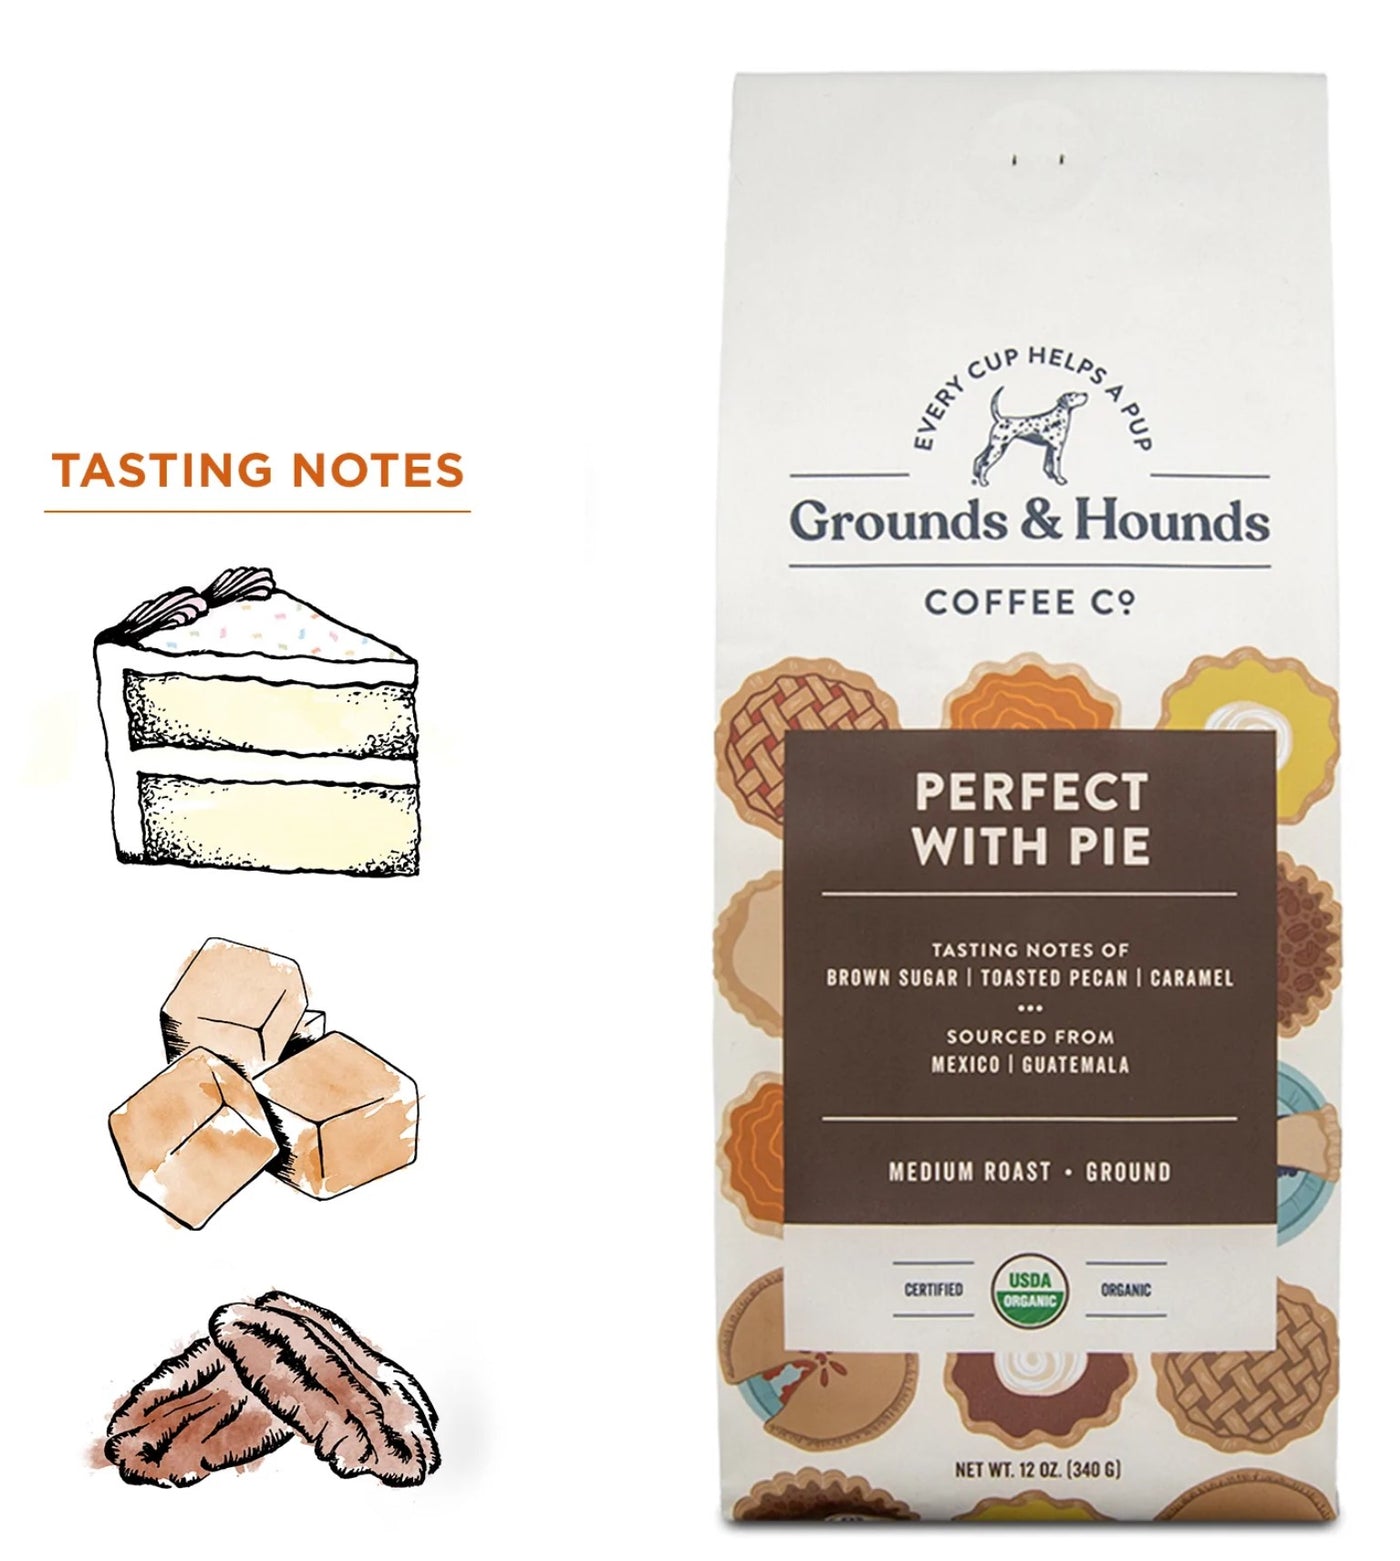 Grounds & Hounds Ground Coffee - Perfect with Pie *